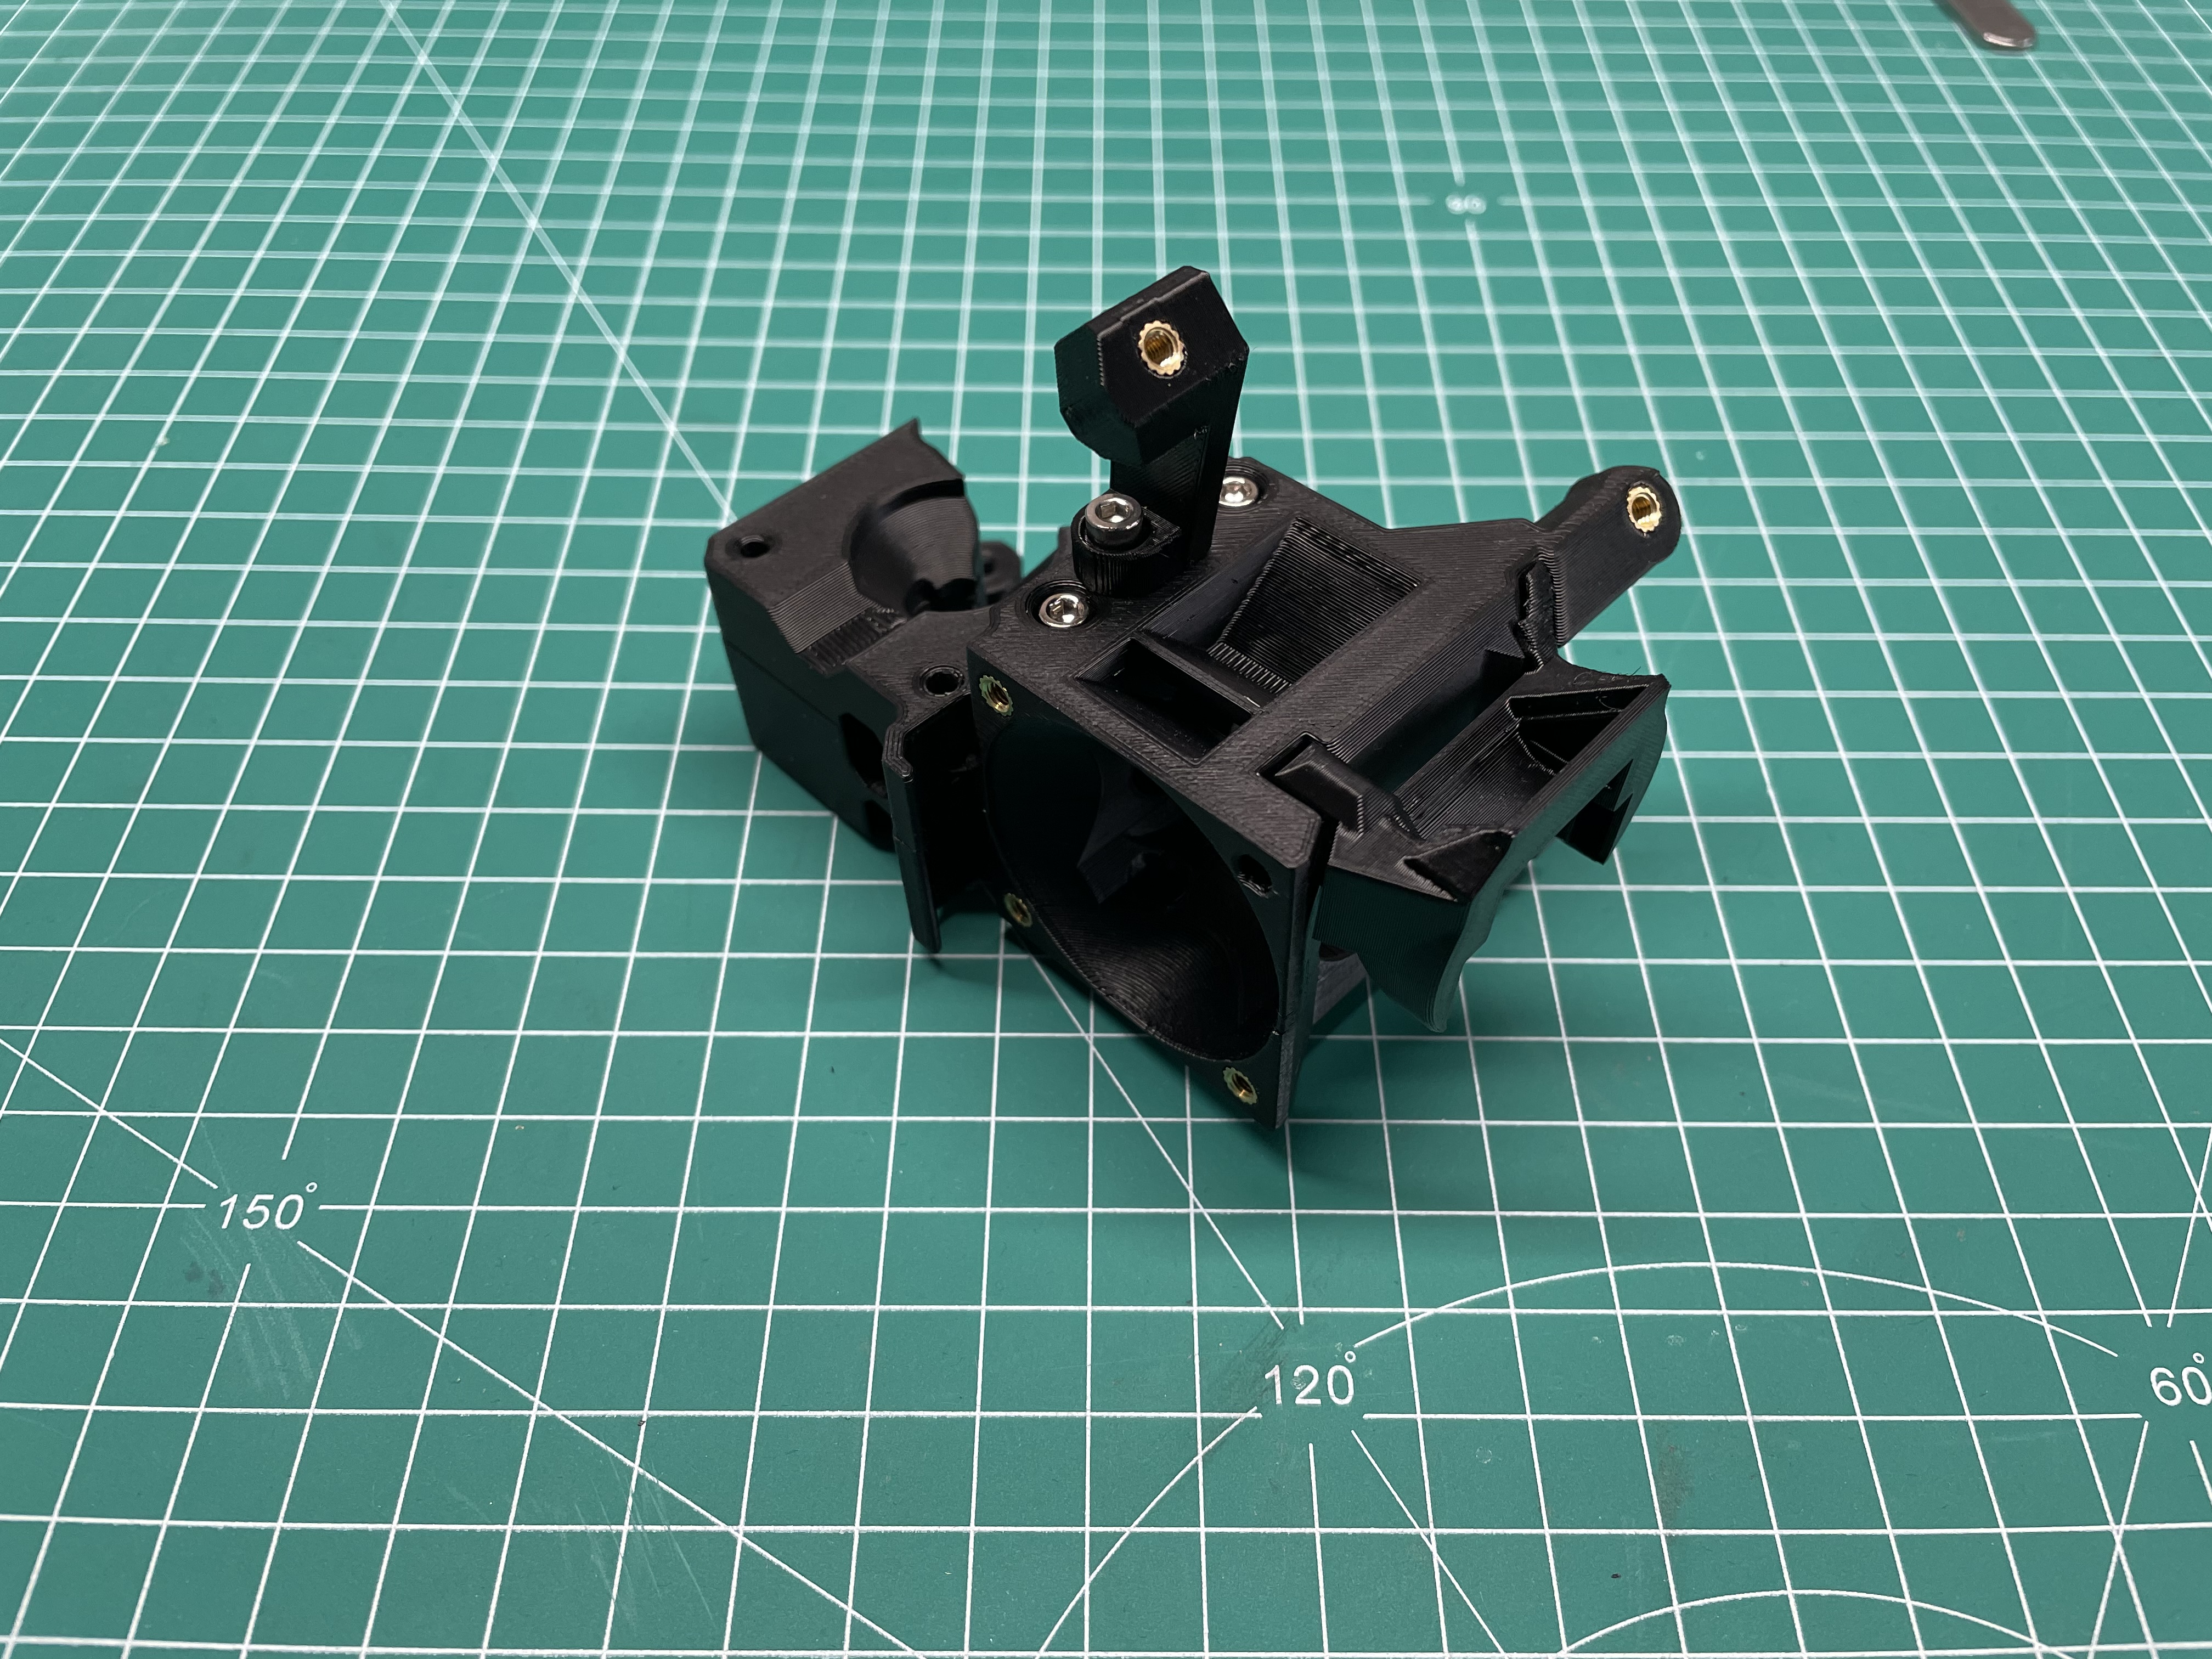 Prusa MK3S+ extruder m3 inserts edition